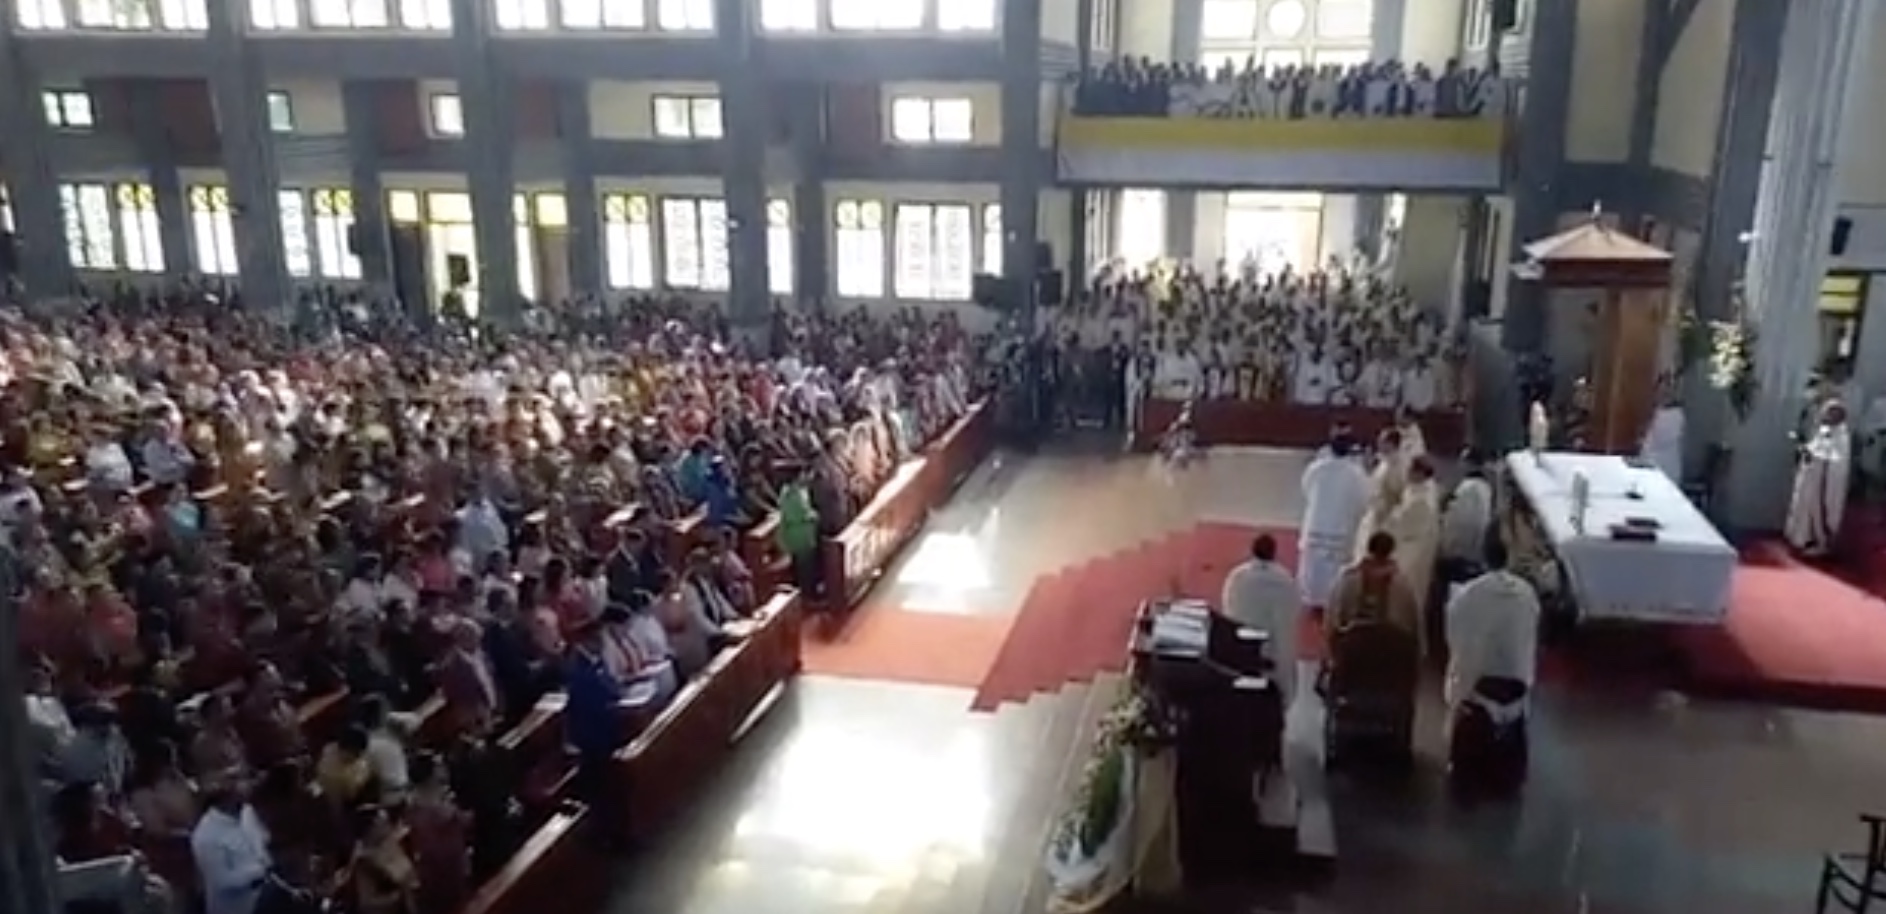 A livestream of the Mass, which took place at the Ruteng Cathedral, was posted on Facebook. Photo: West Manggarai Regency / Facebook